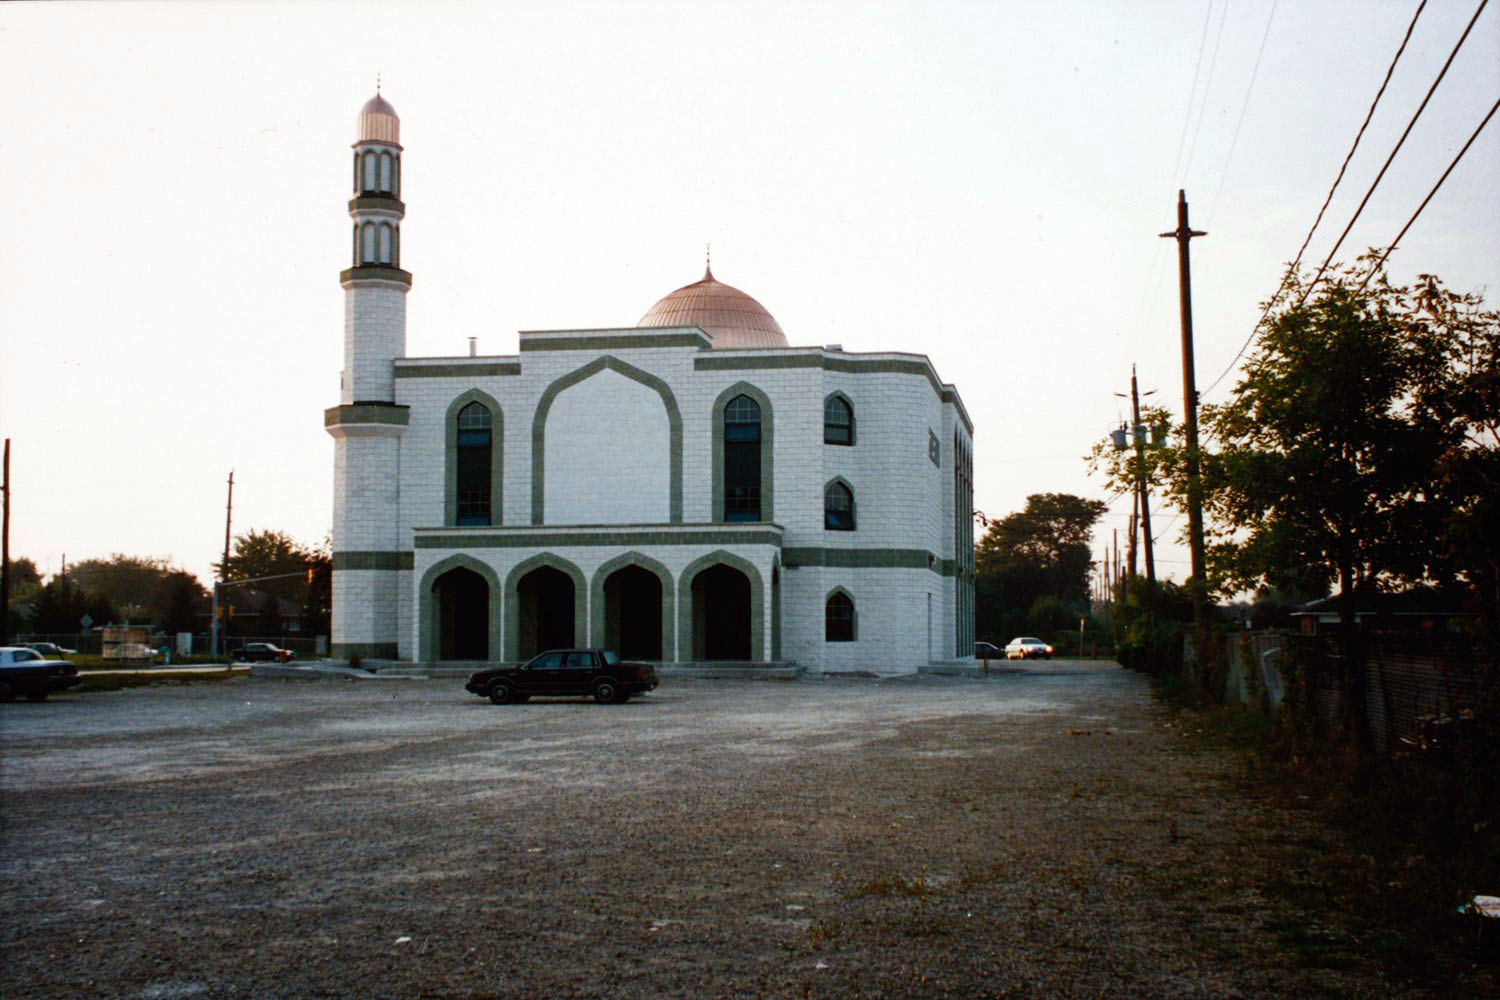 View of the northern facade, the entrance to the new section of the mosque, seen from the parking lot